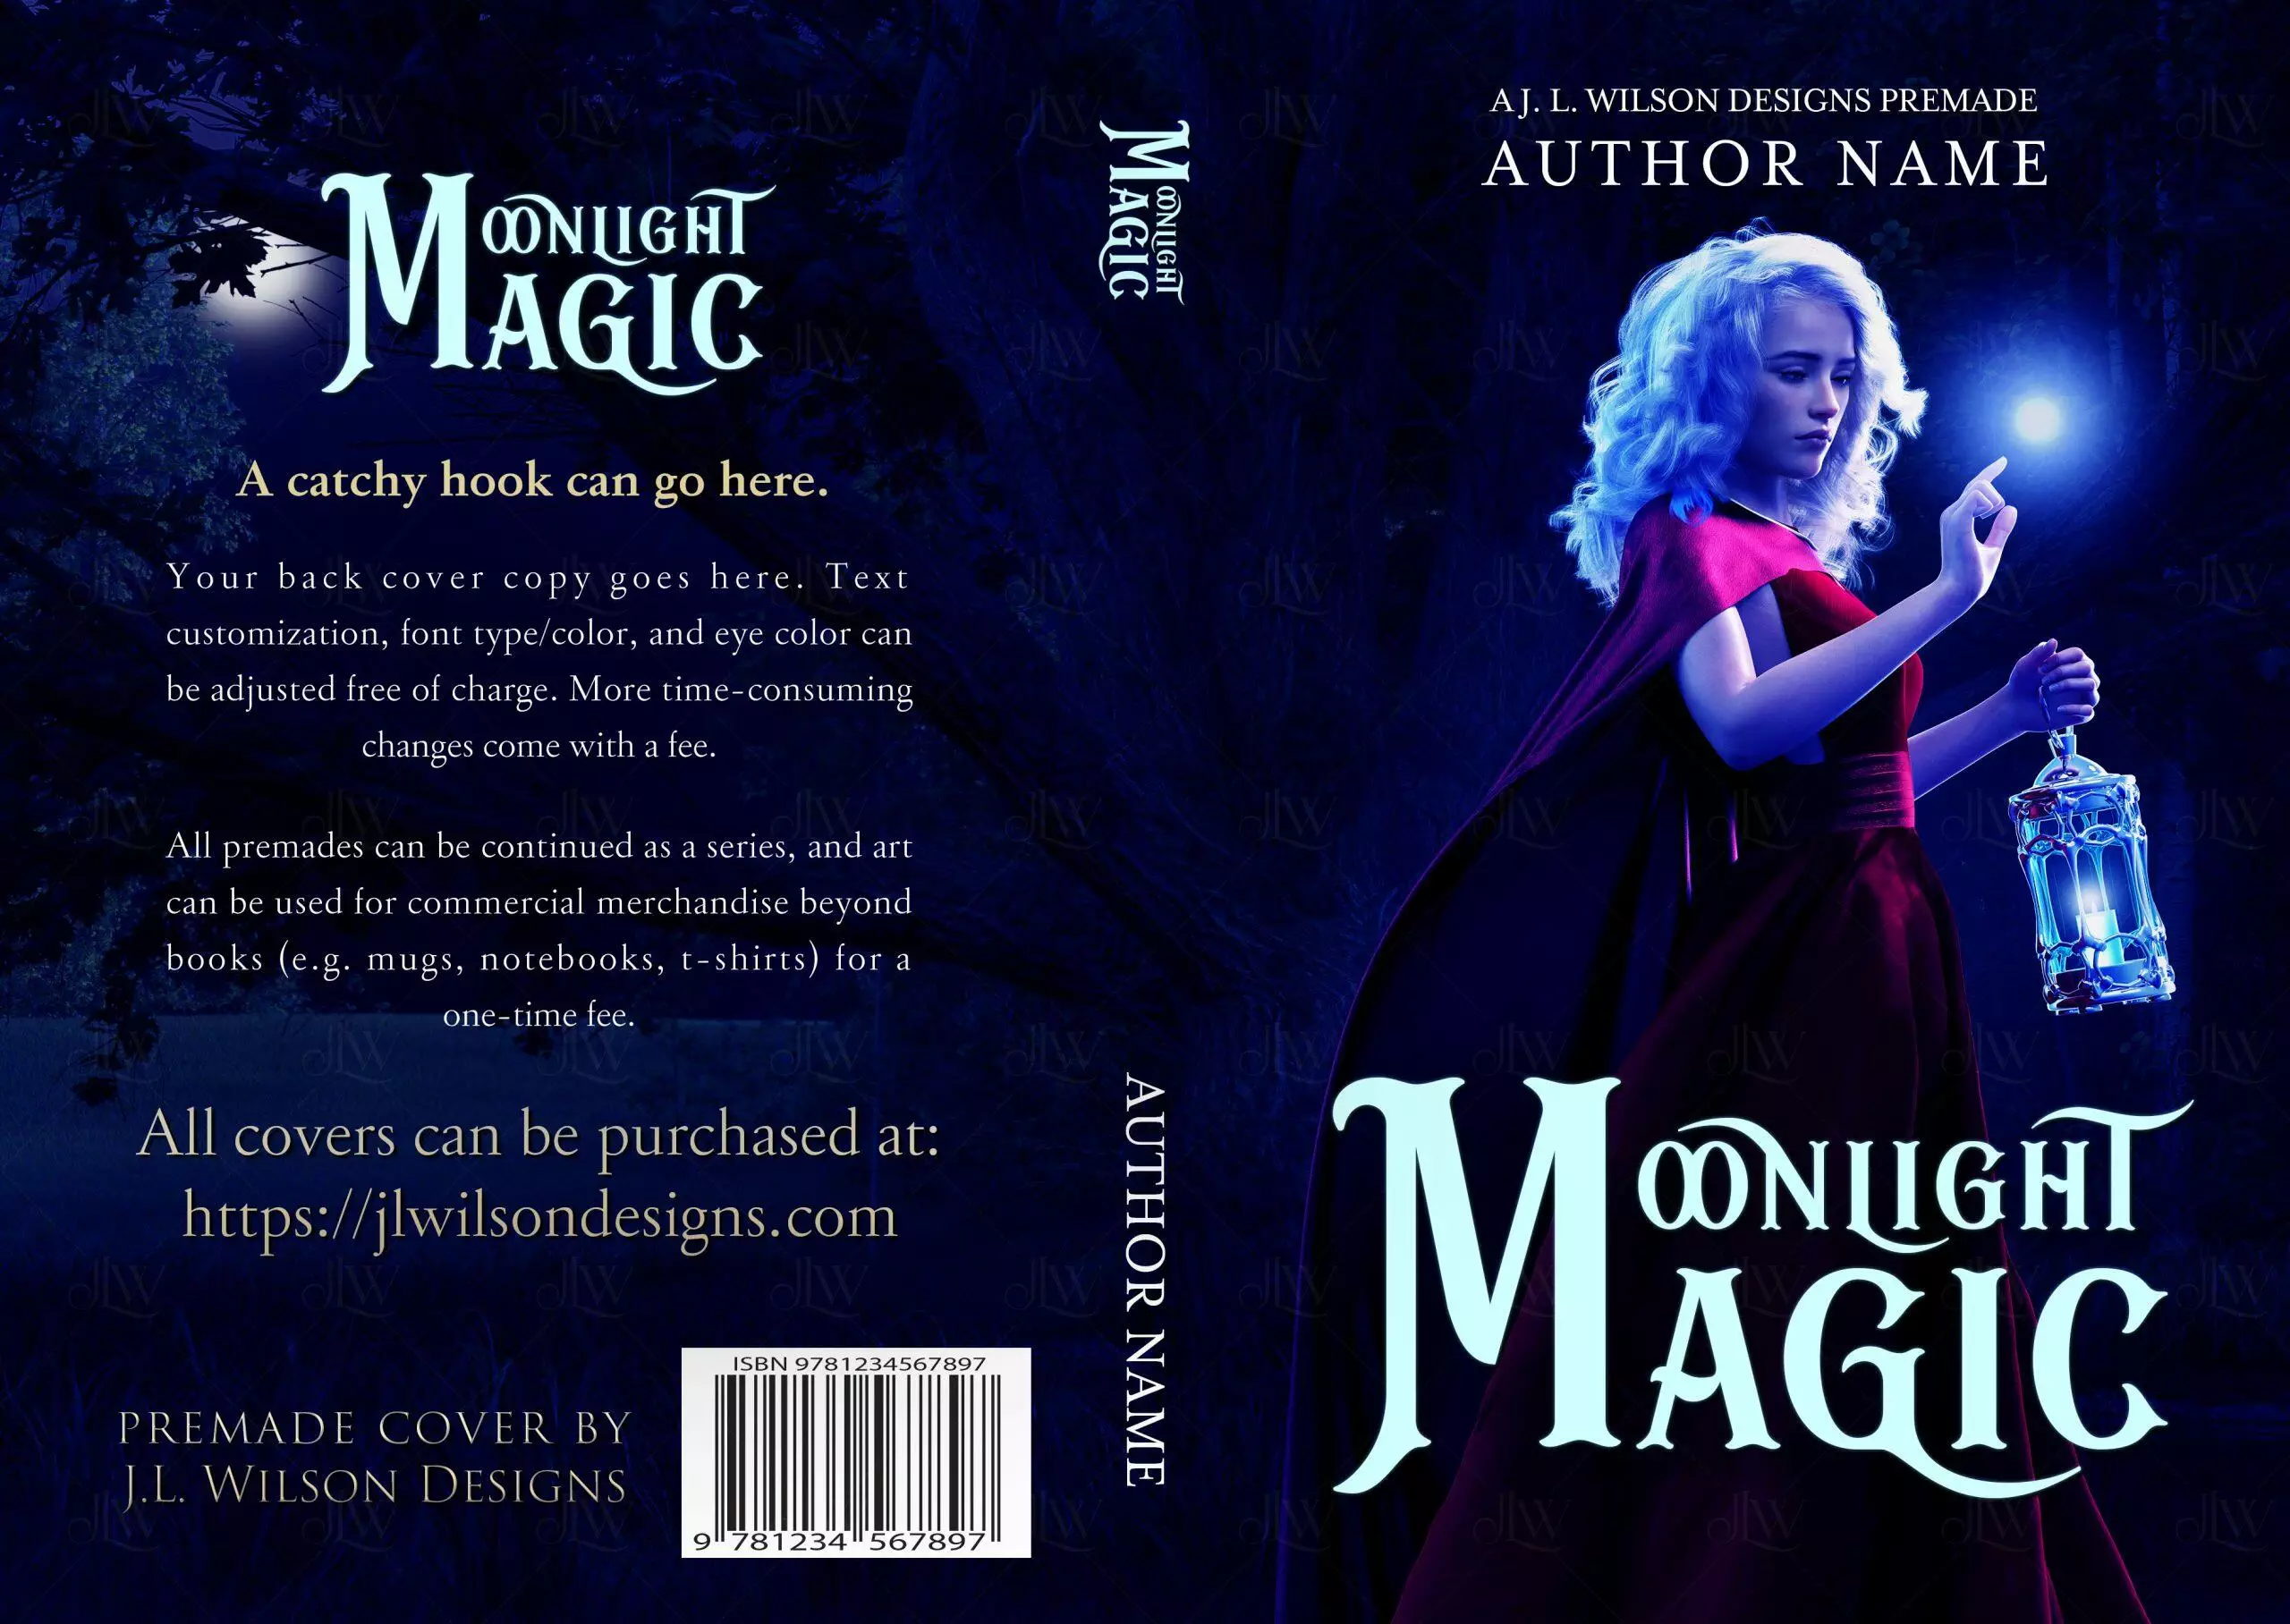 A fantasy book cover with a beautiful woman in a red dress following magic in a magical forest